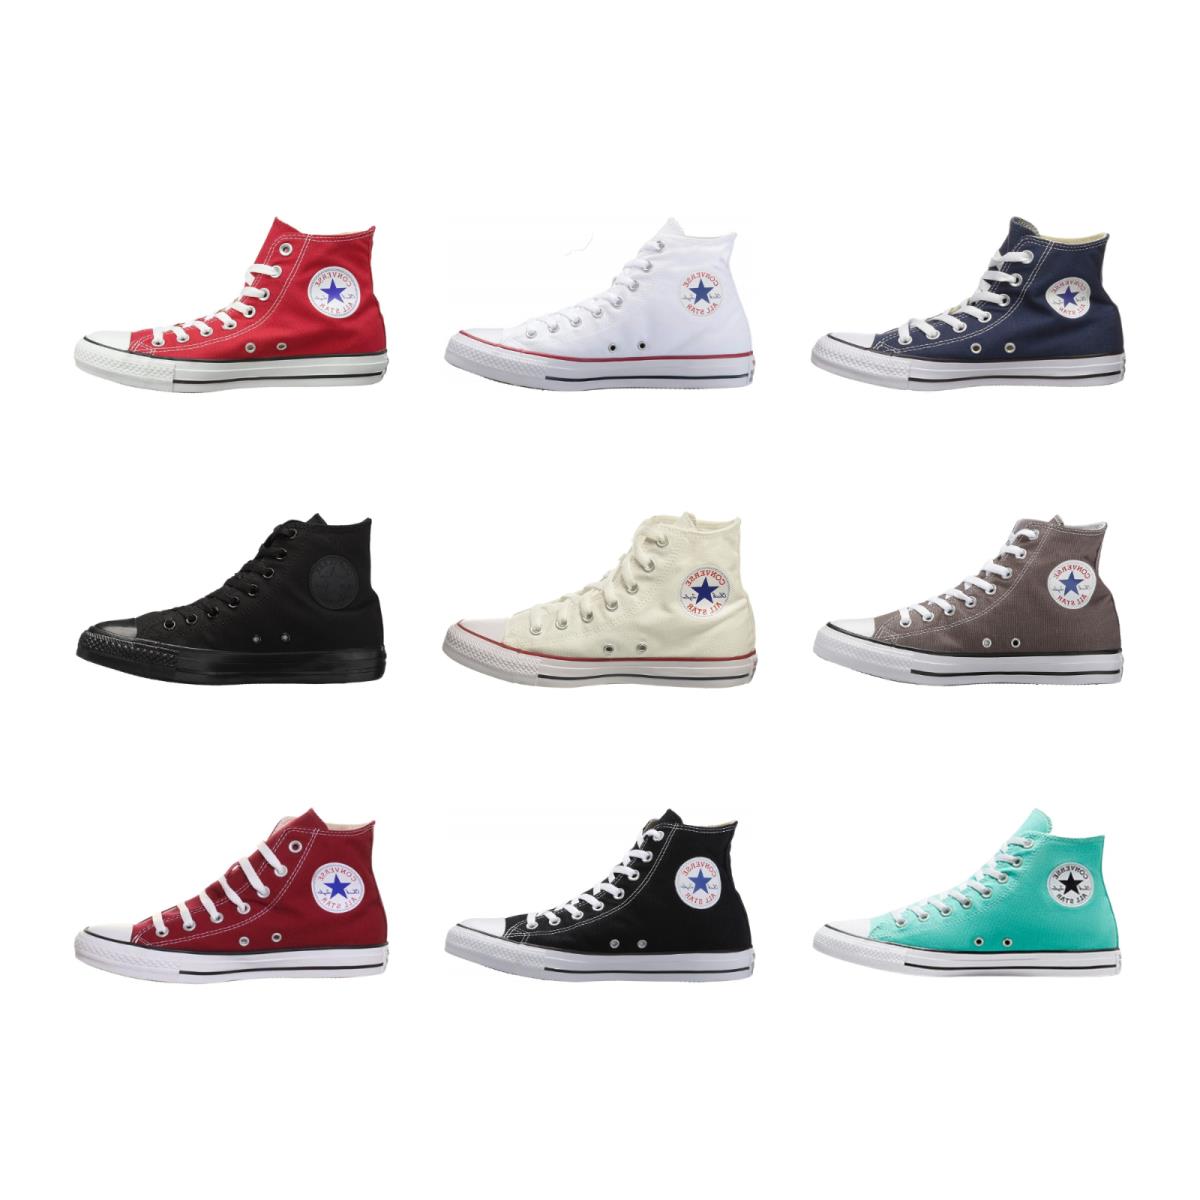 Converse Chuck Taylor All Star High Top Unisex Canvas Sneaker Classic Shoes